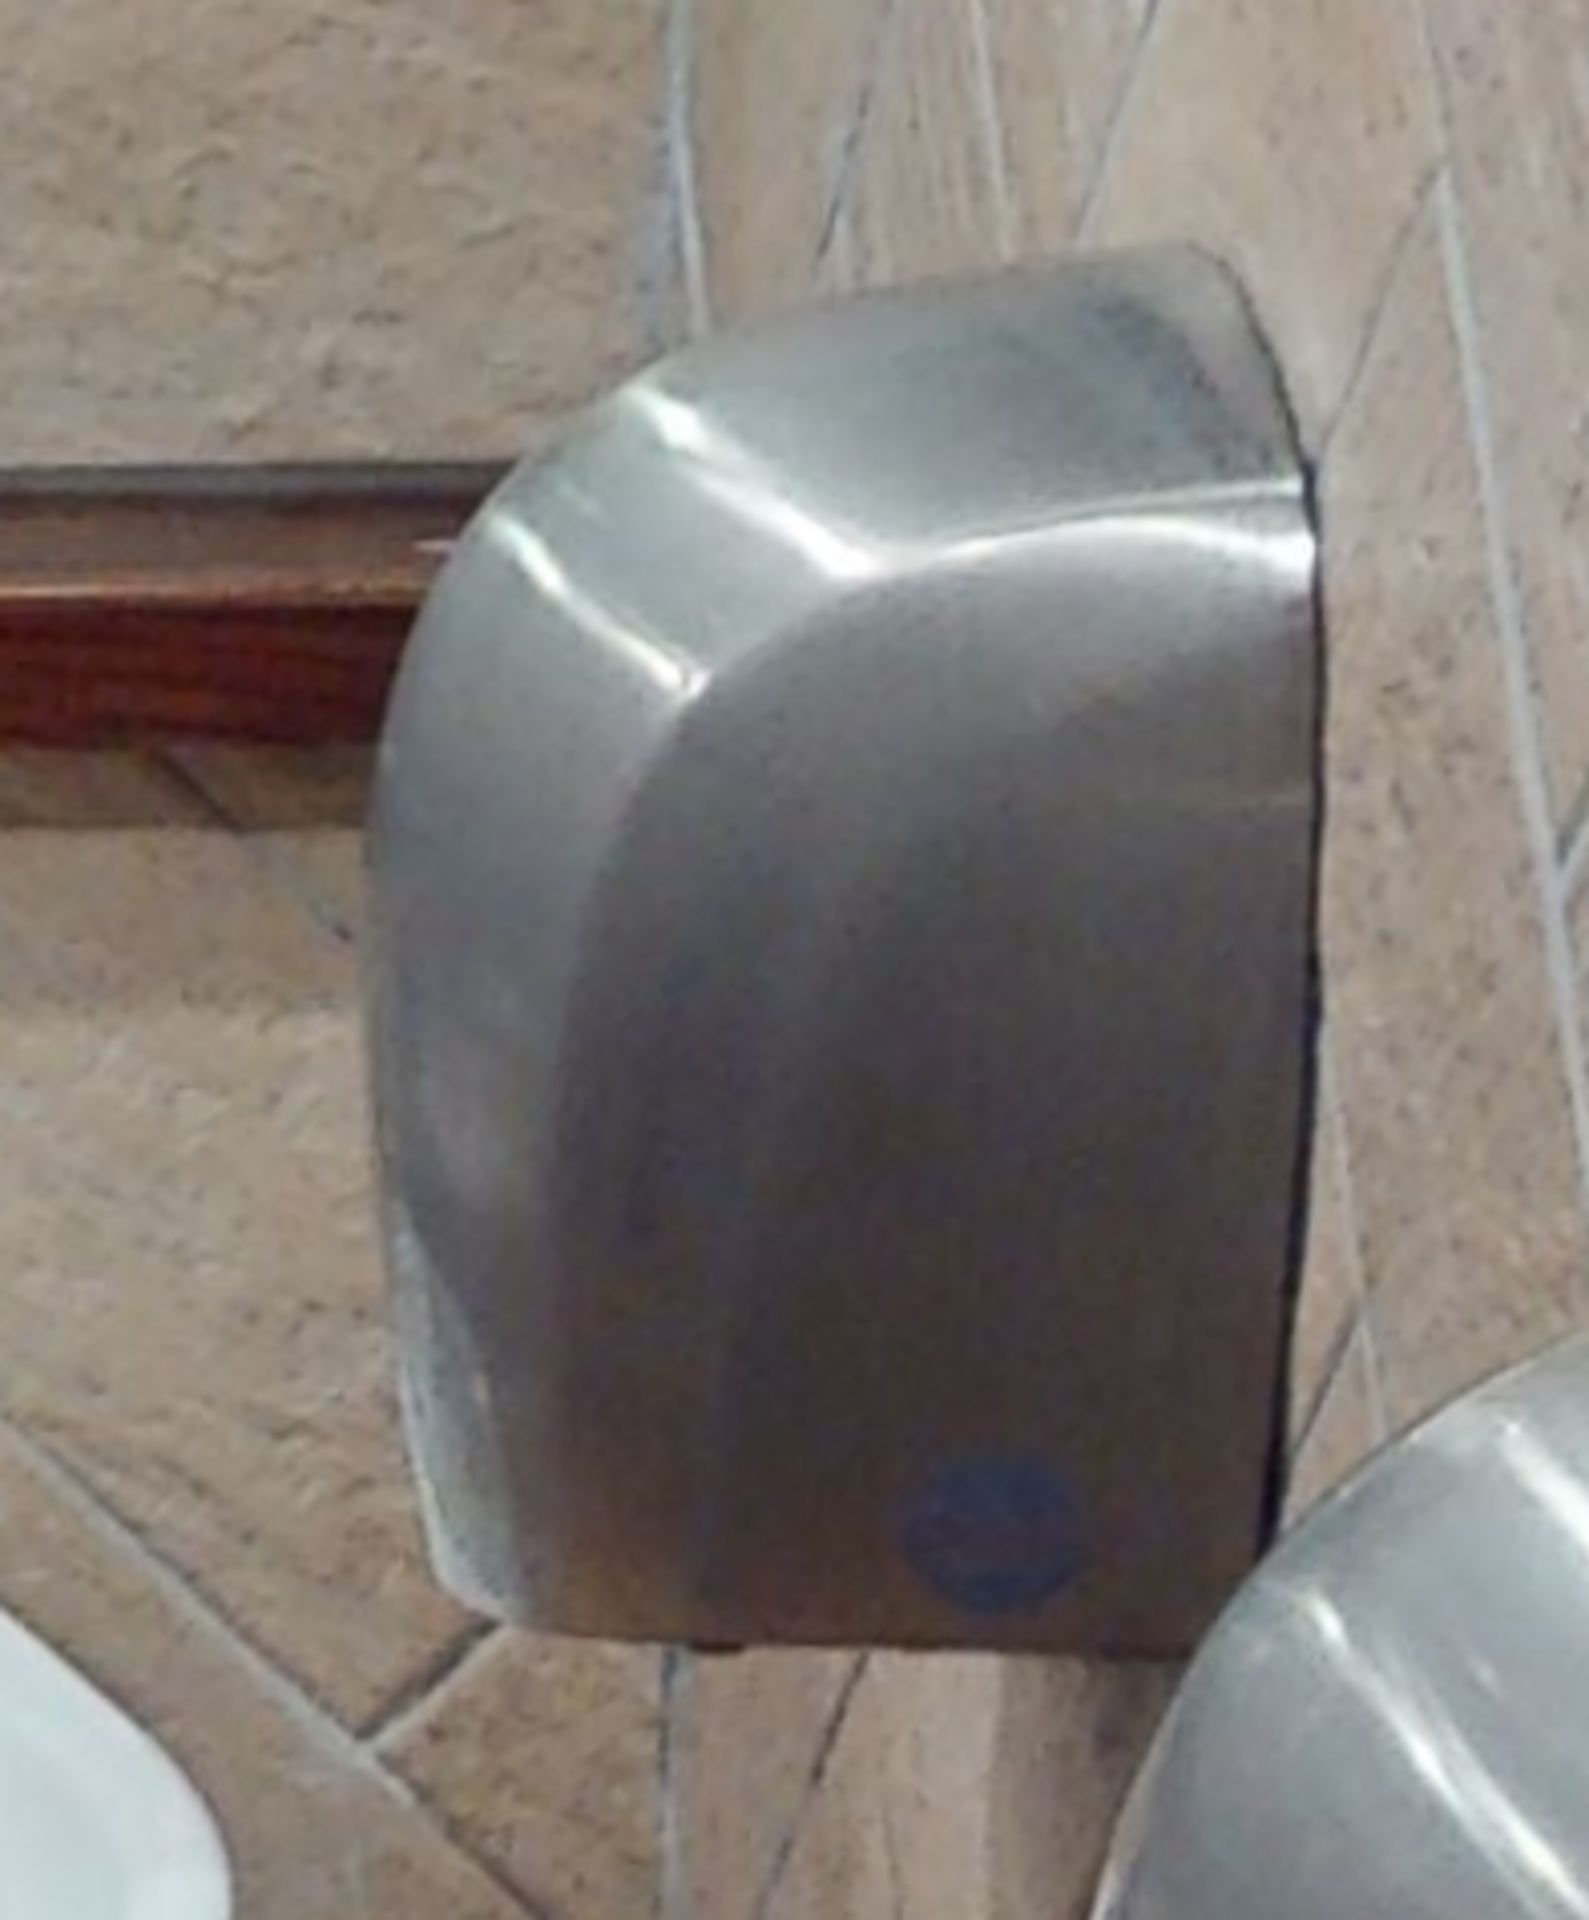 1 x Airforce Bathroom Electric Hand Dryer With Chrome Finish - Image 2 of 2